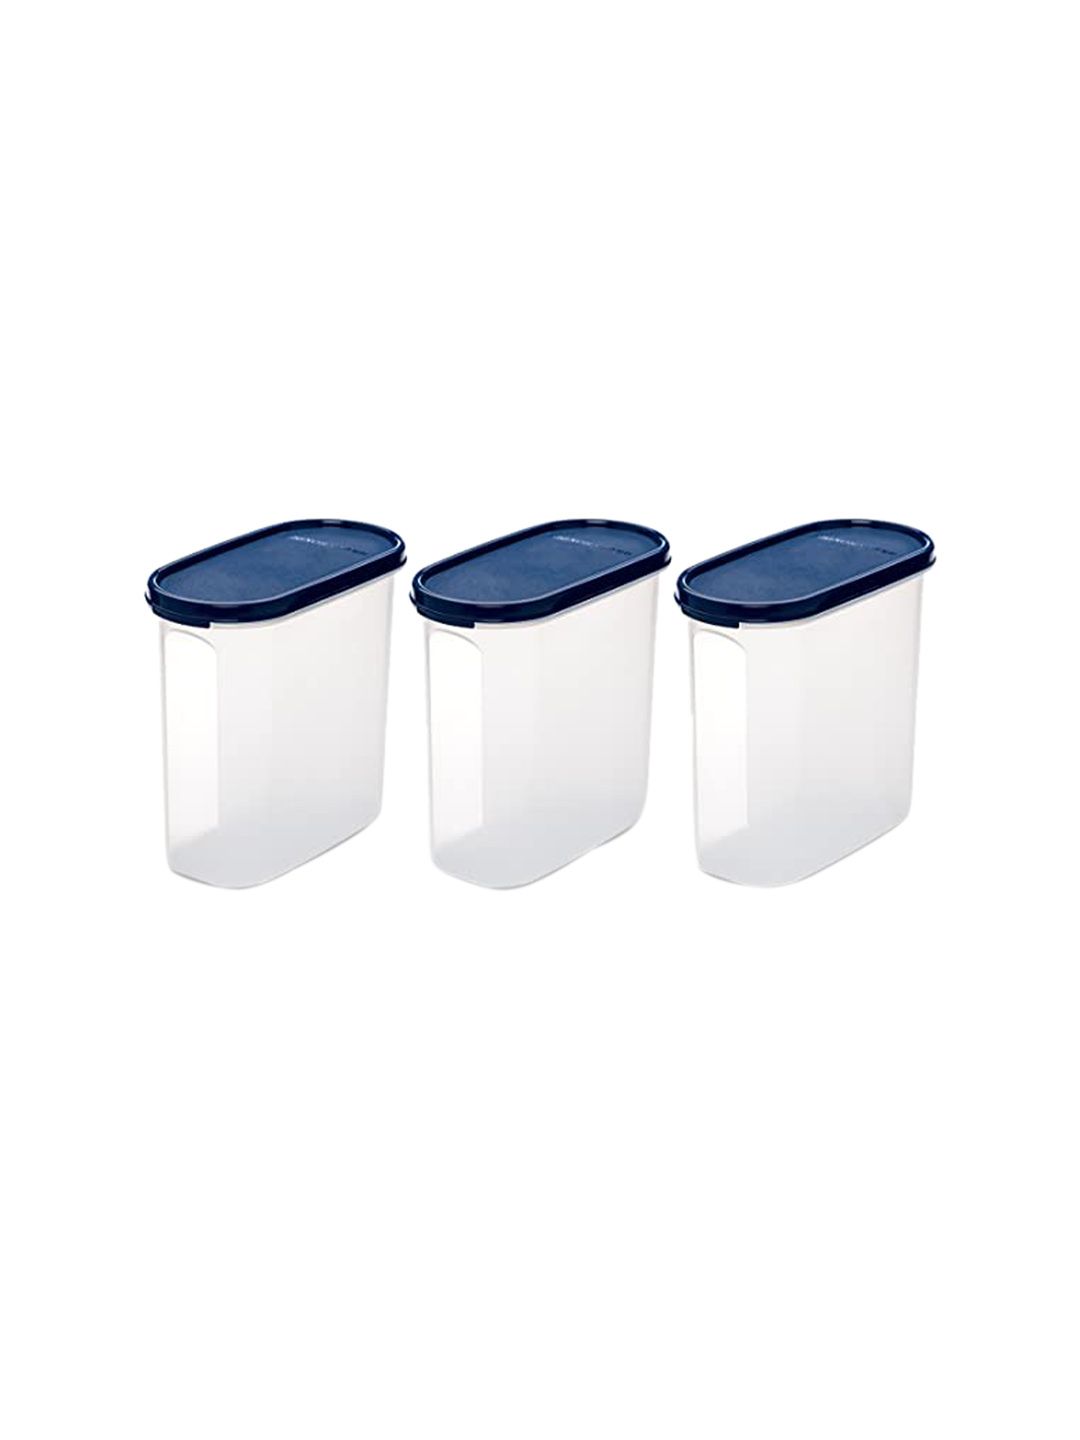 SignoraWare Set Of 3 Transparent & Blue Solid Kitchen Storage Containers Price in India